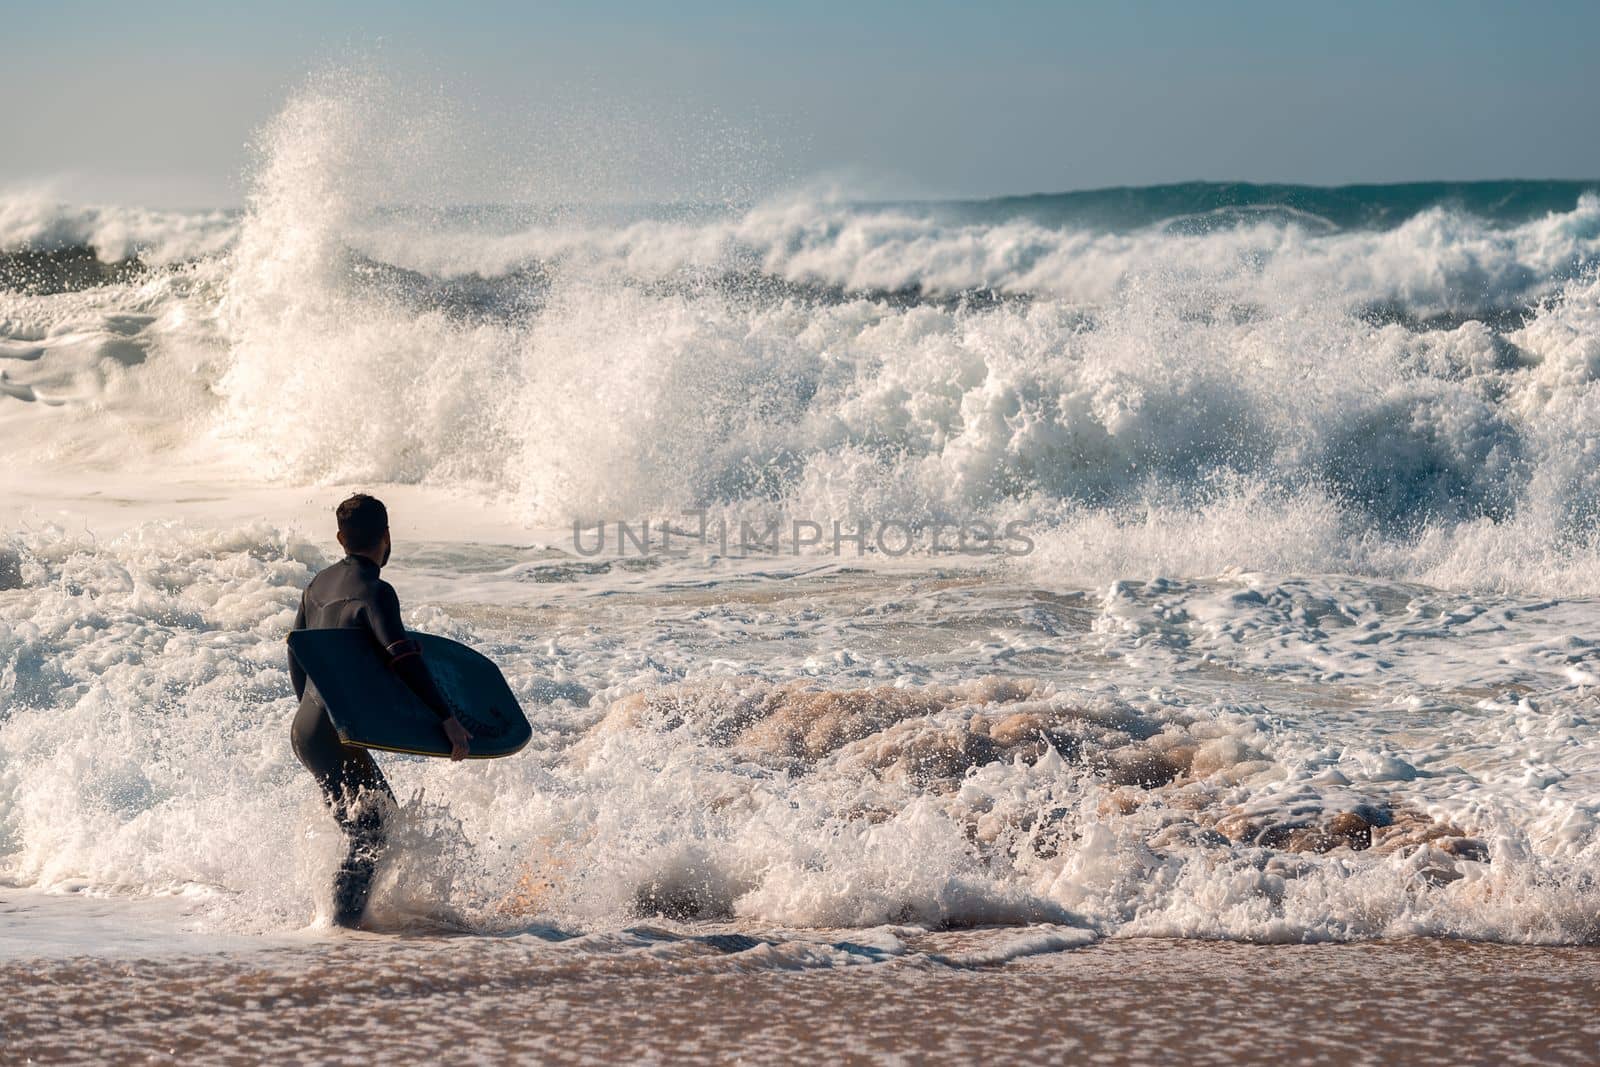 Man on the seashore prepares to surf, wears a black neoprene wetsuit and in his hand has a bodyboard, water covers him to the knee while defies the rough sea breaking powerful